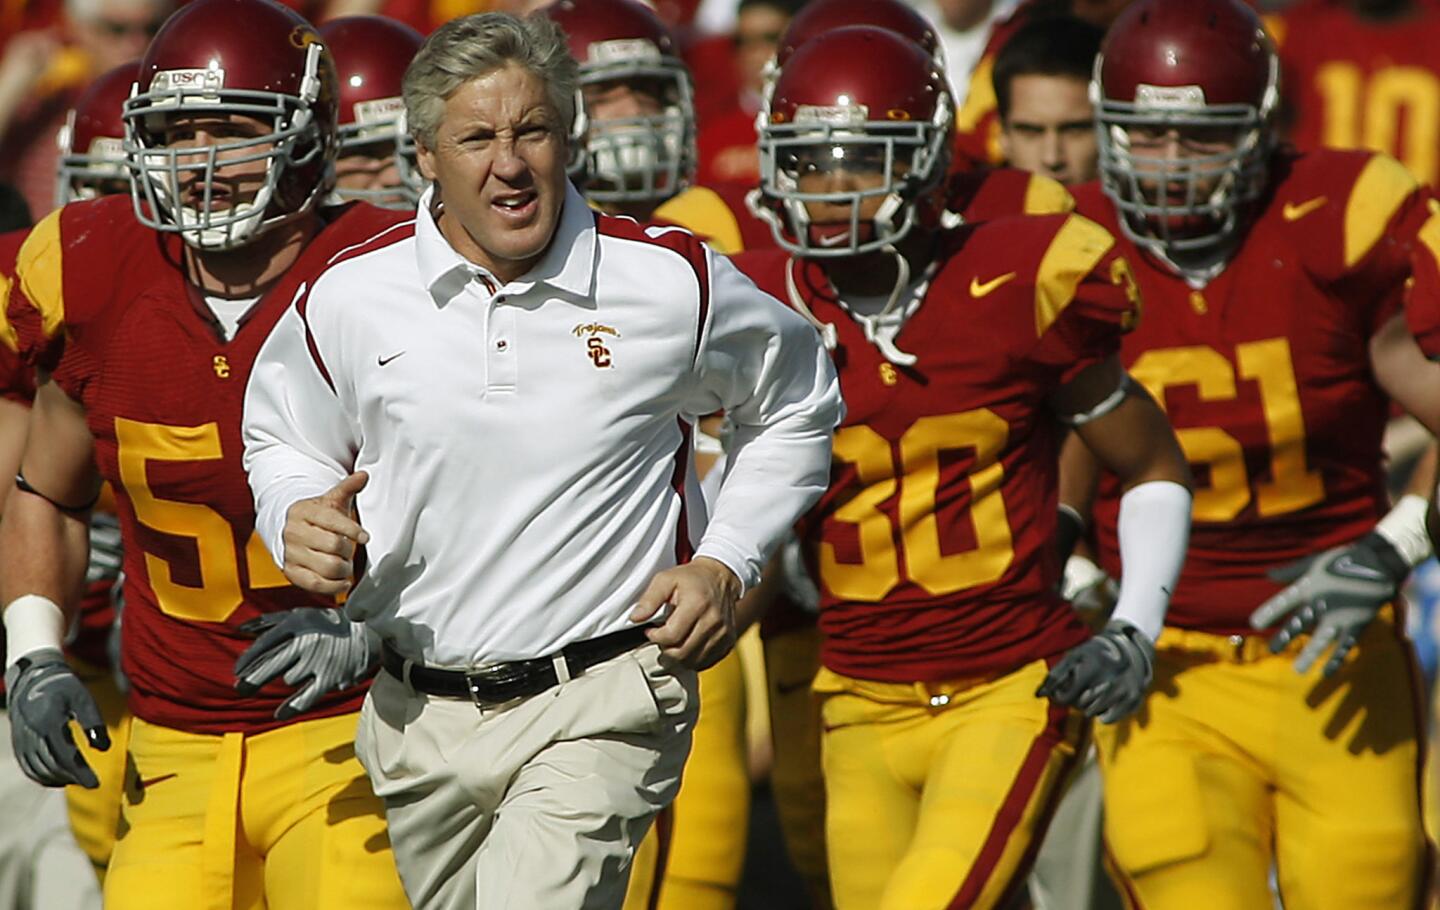 USC Coach Pete Carroll leads the Trojans on to the field for a game against UCLA at the Rose Bowl on Dec. 6, 2008.